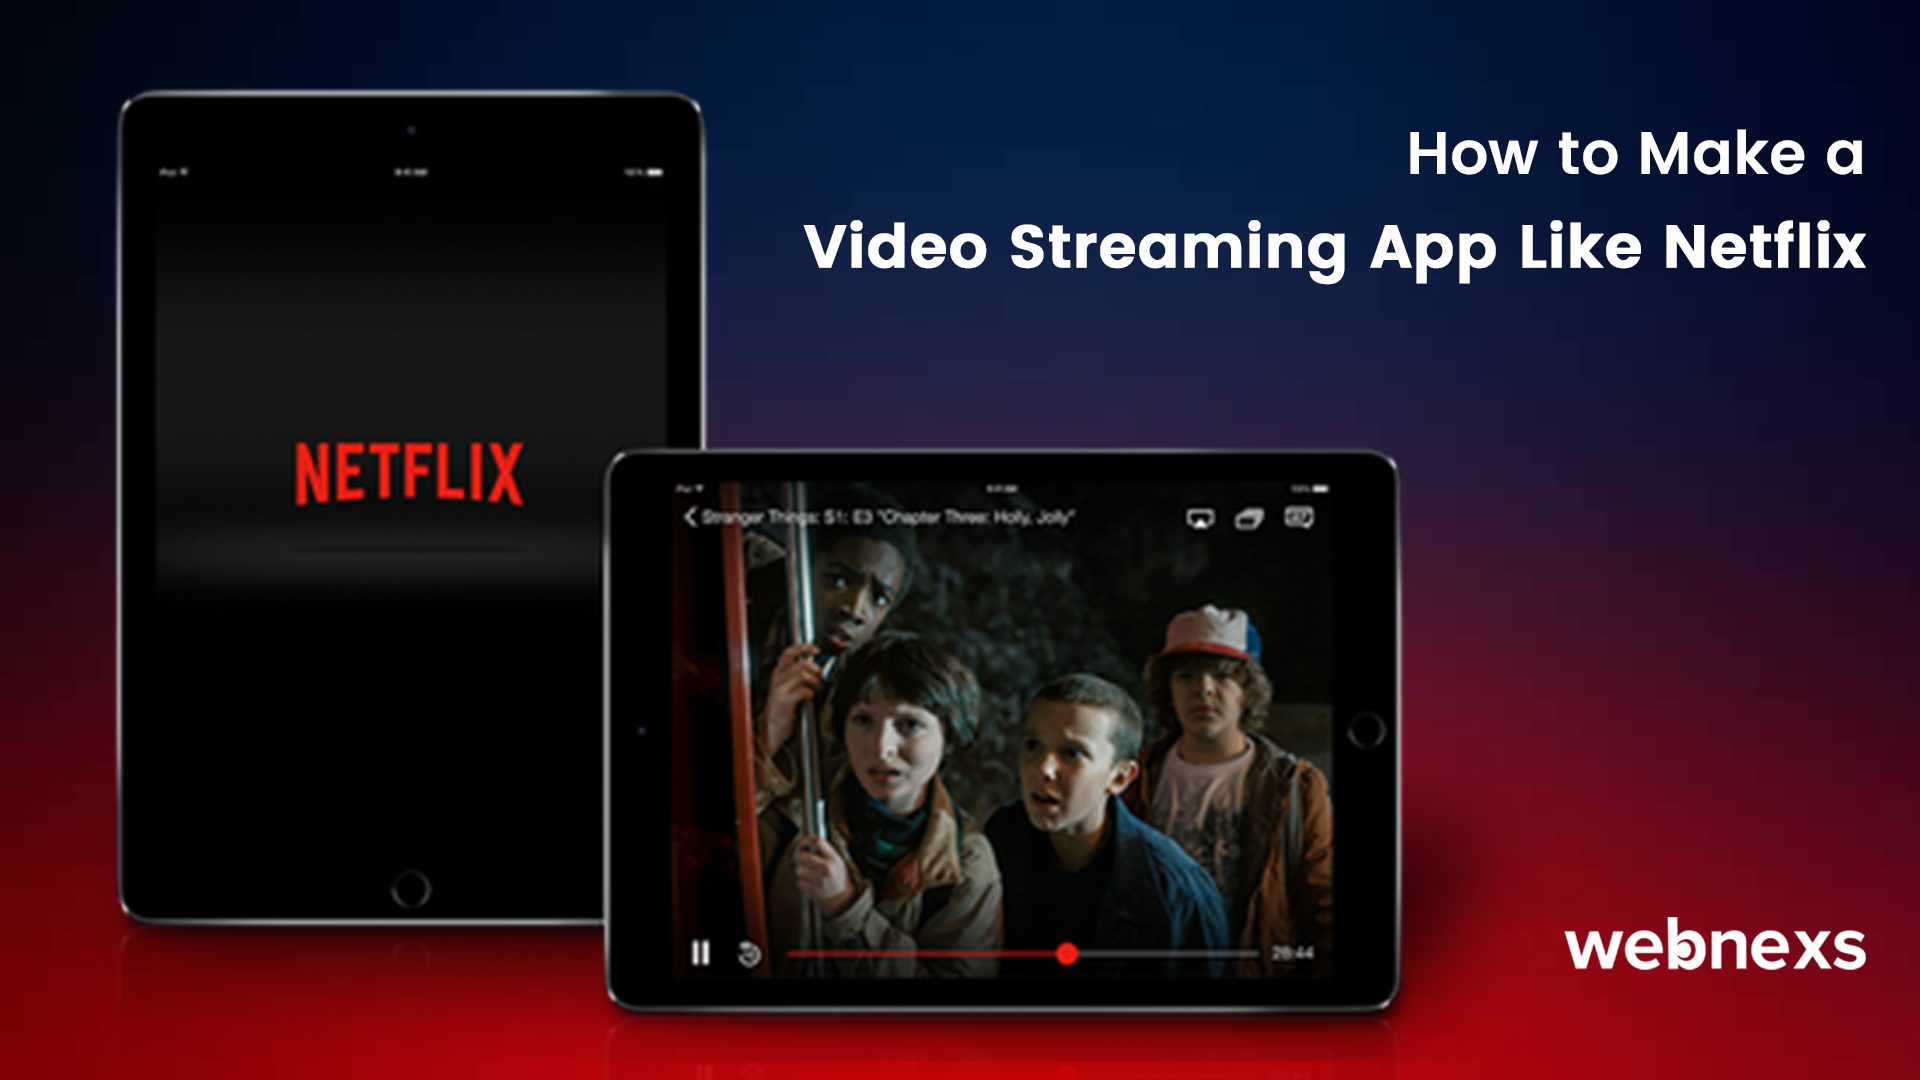 How to start a VOD website like Netflix in 6 Simple Steps? Build your own streaming platform